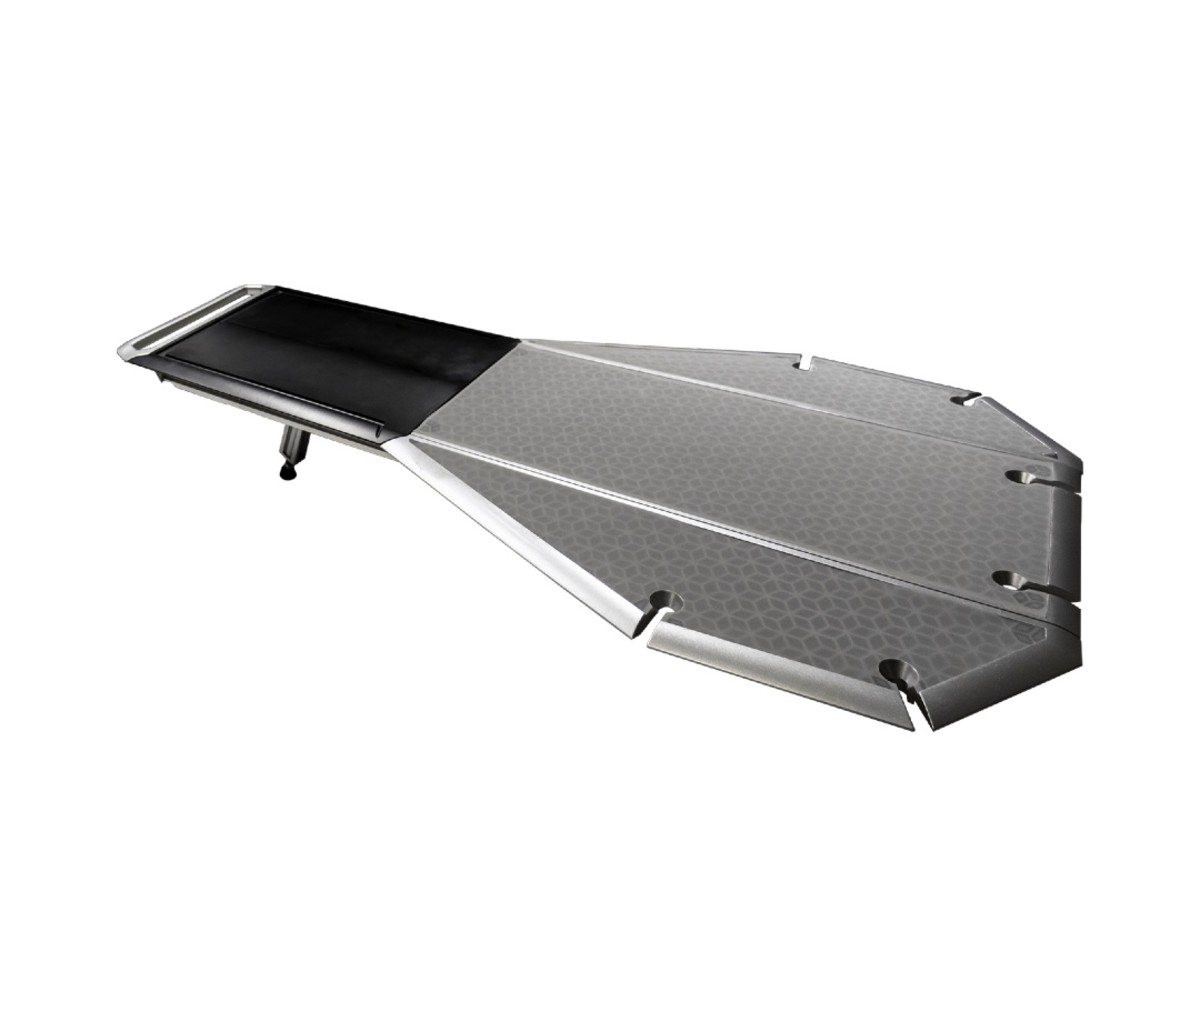 Tail Table, portable tailgating table